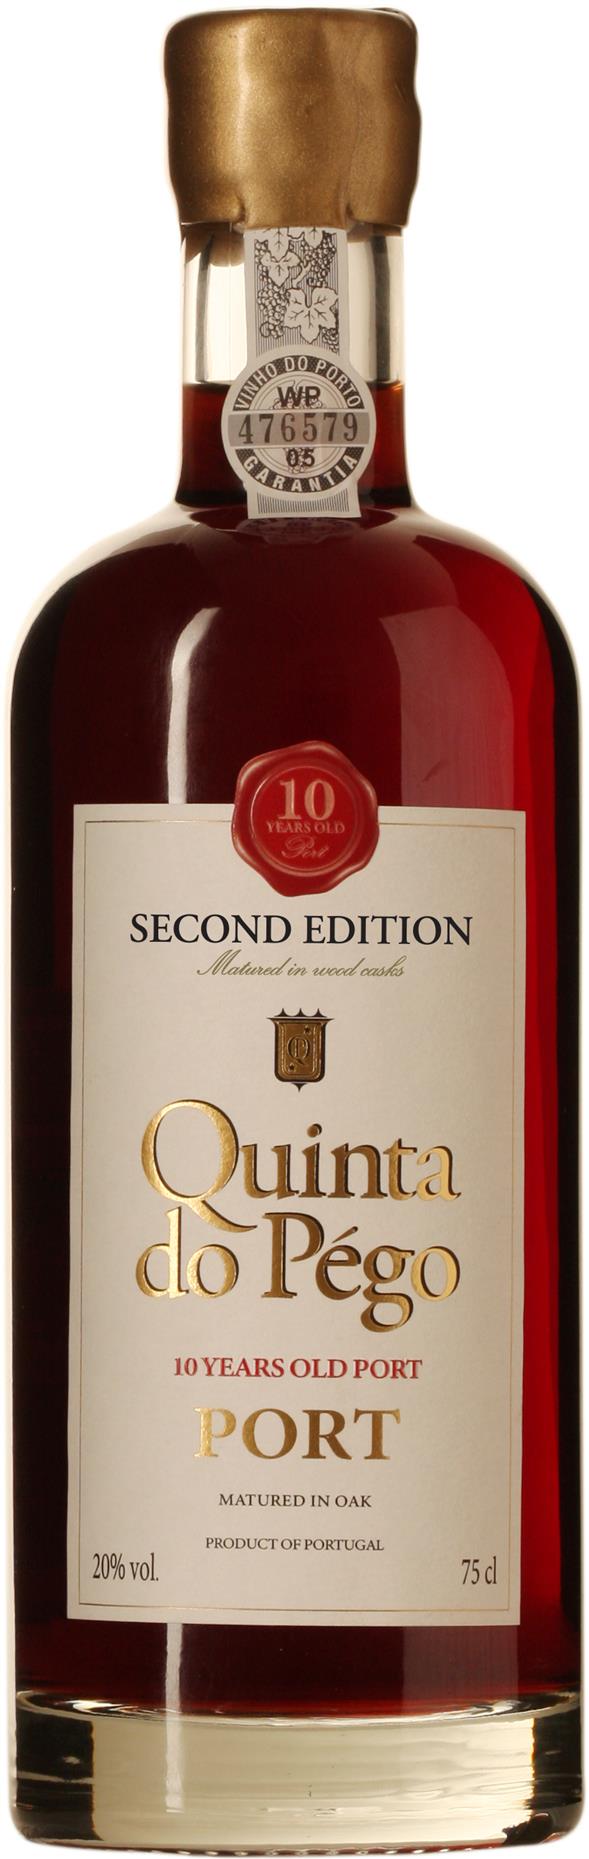 Quinta do Pégo 10 Years old port Second edition